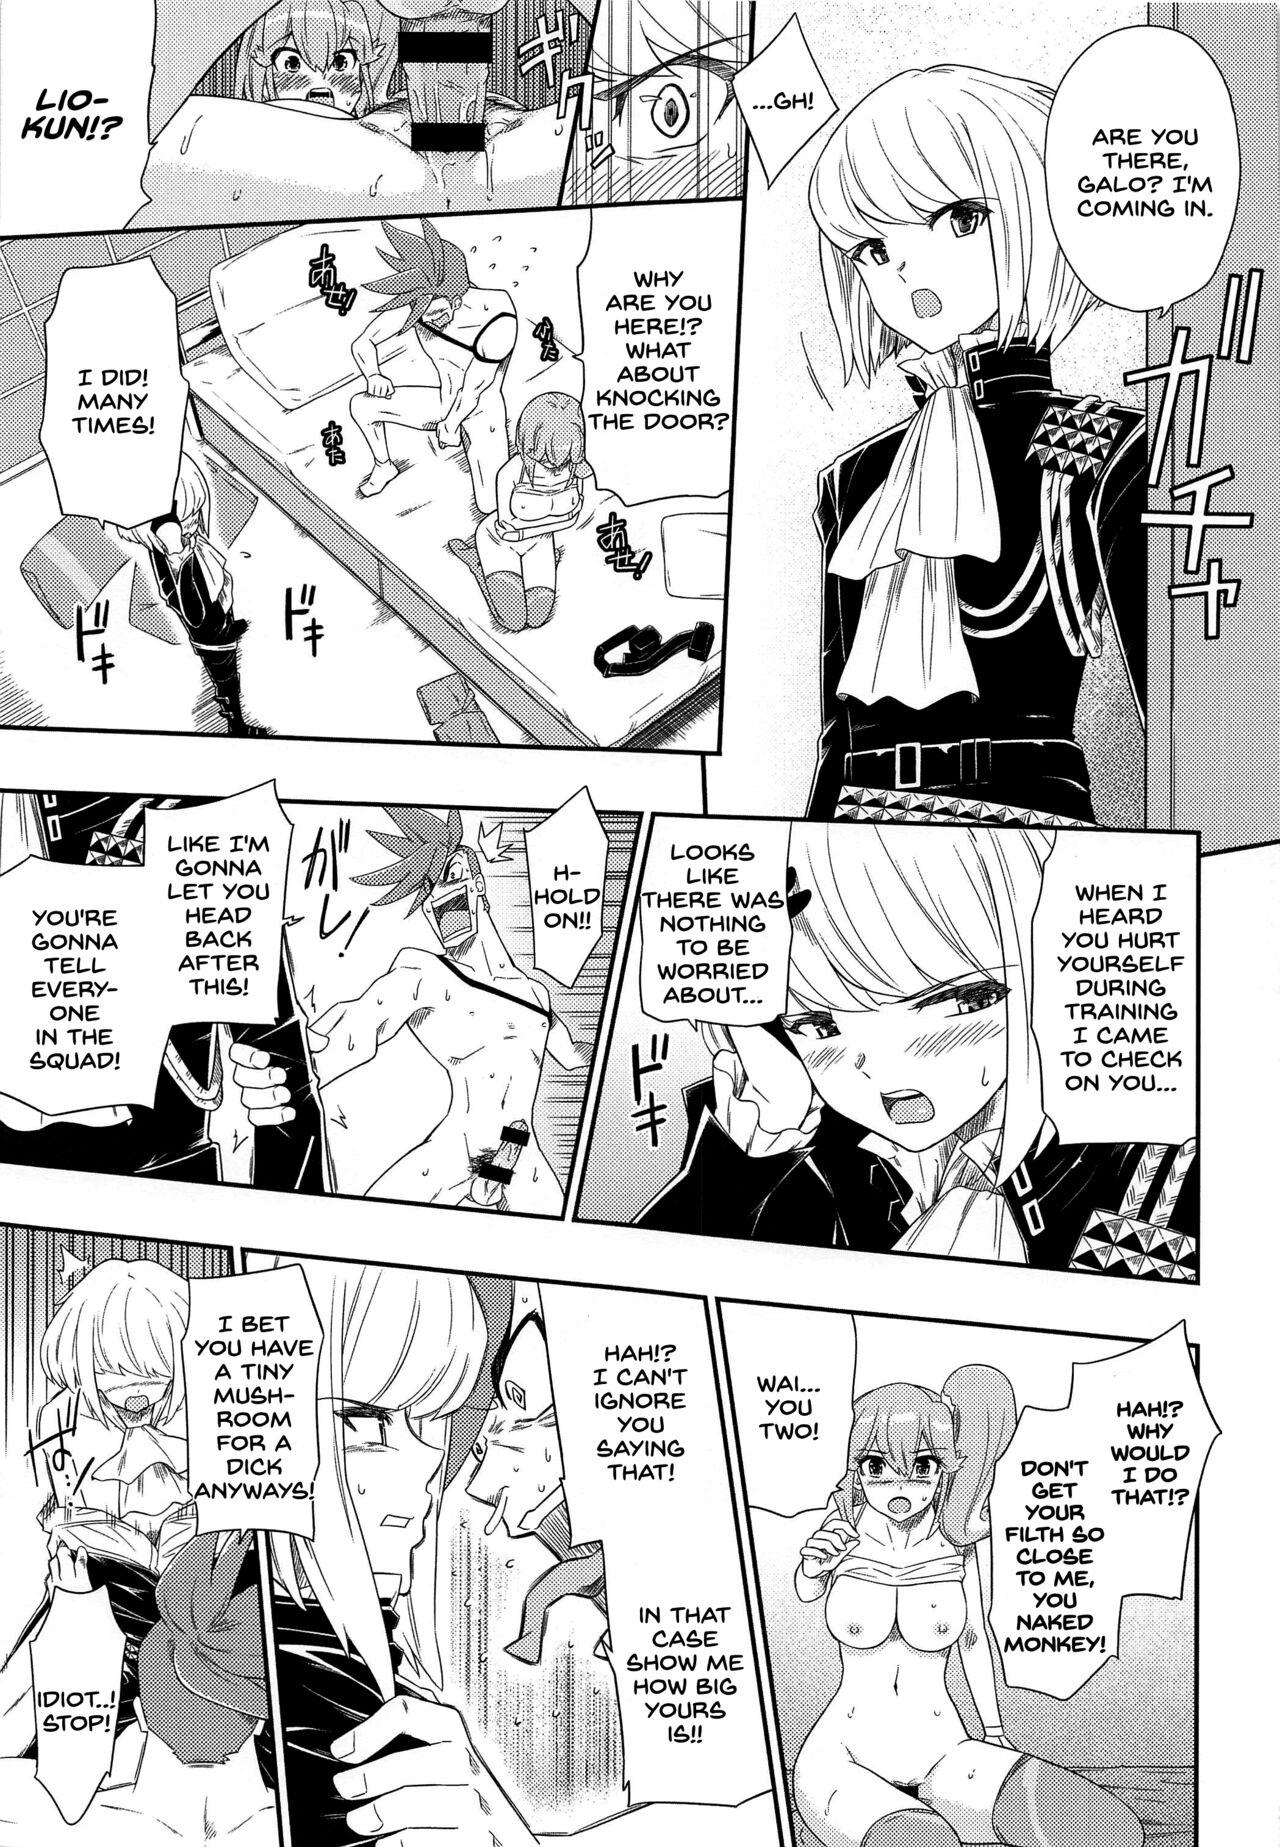 Bottom EROMARE - Suddenly 3P sex is happening... Pussyeating - Page 6